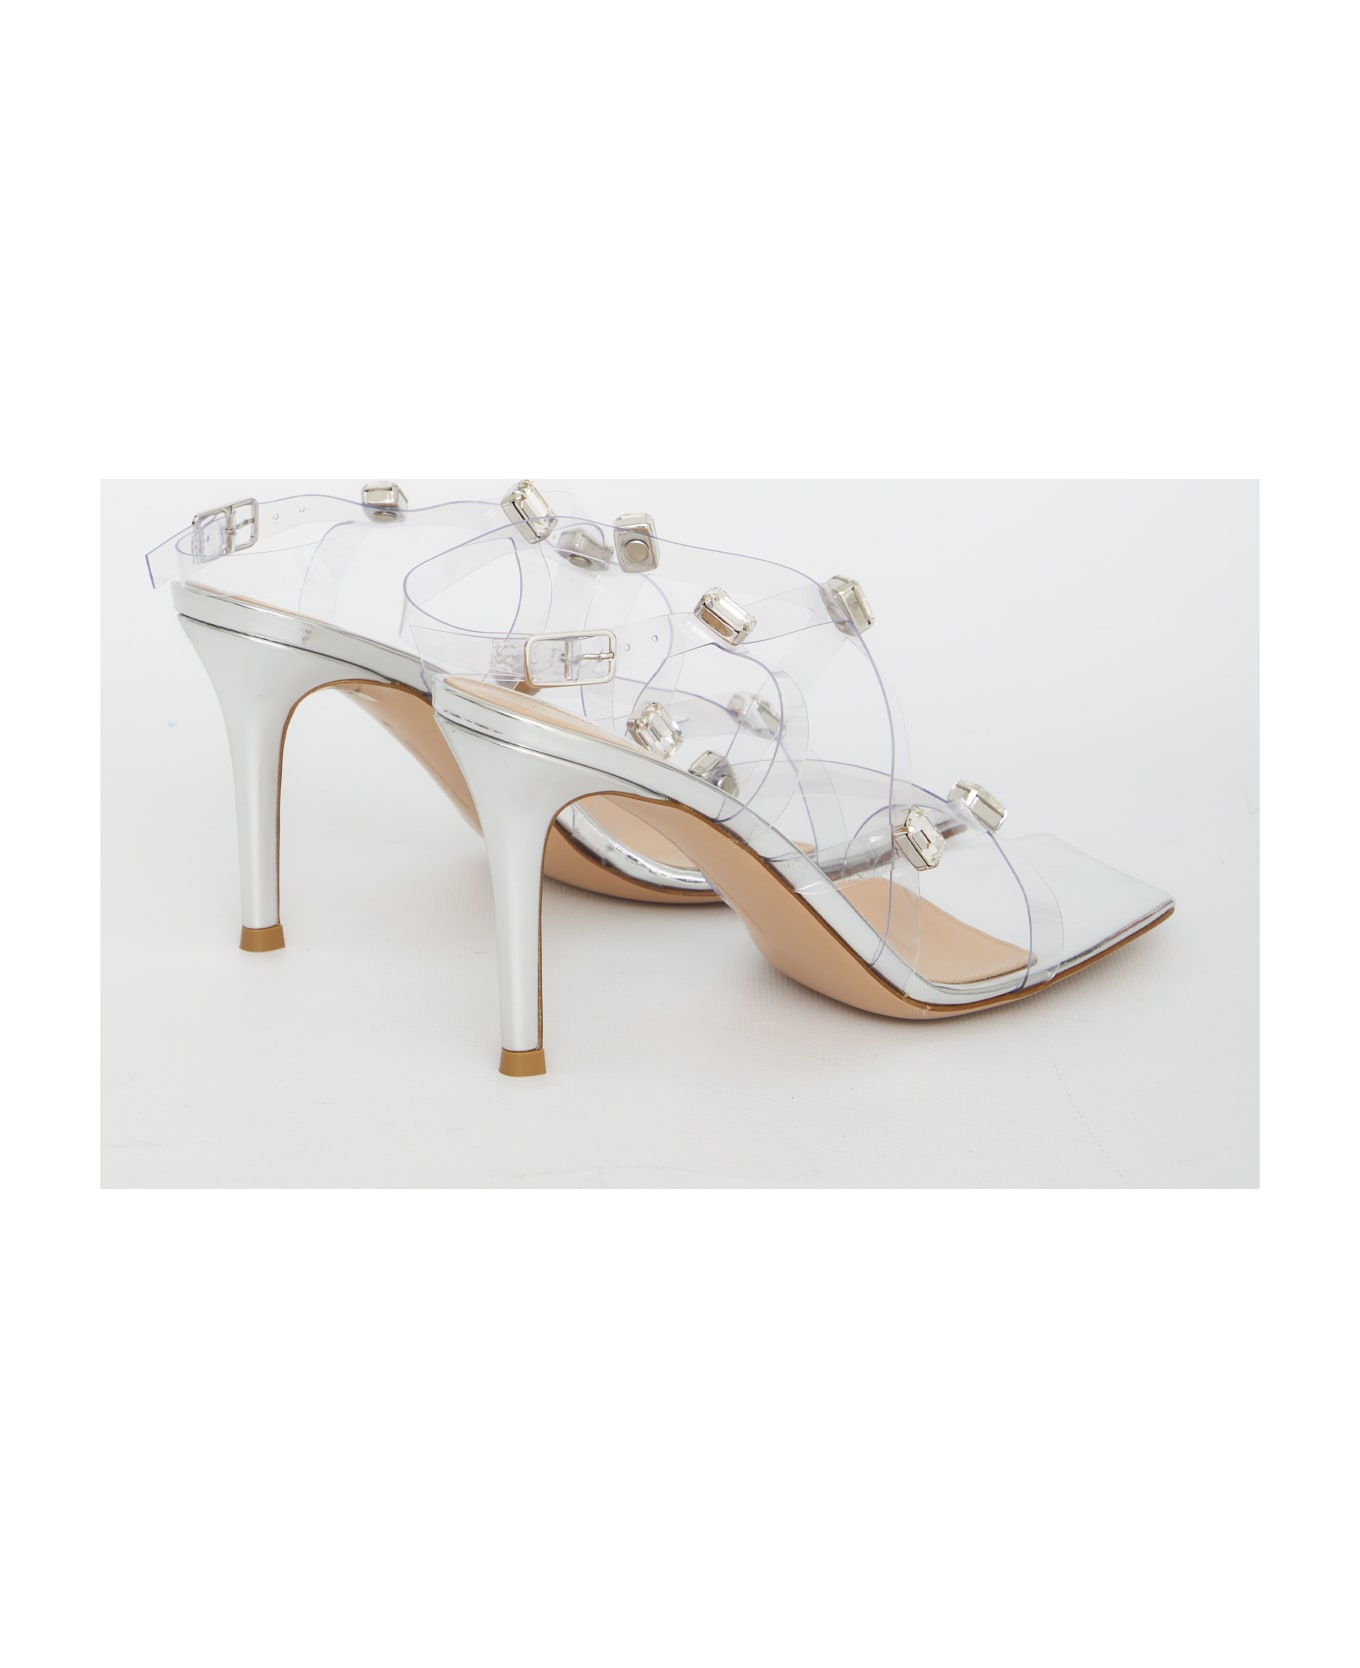 Gianvito Rossi Crystal Fever Sandals - SILVER